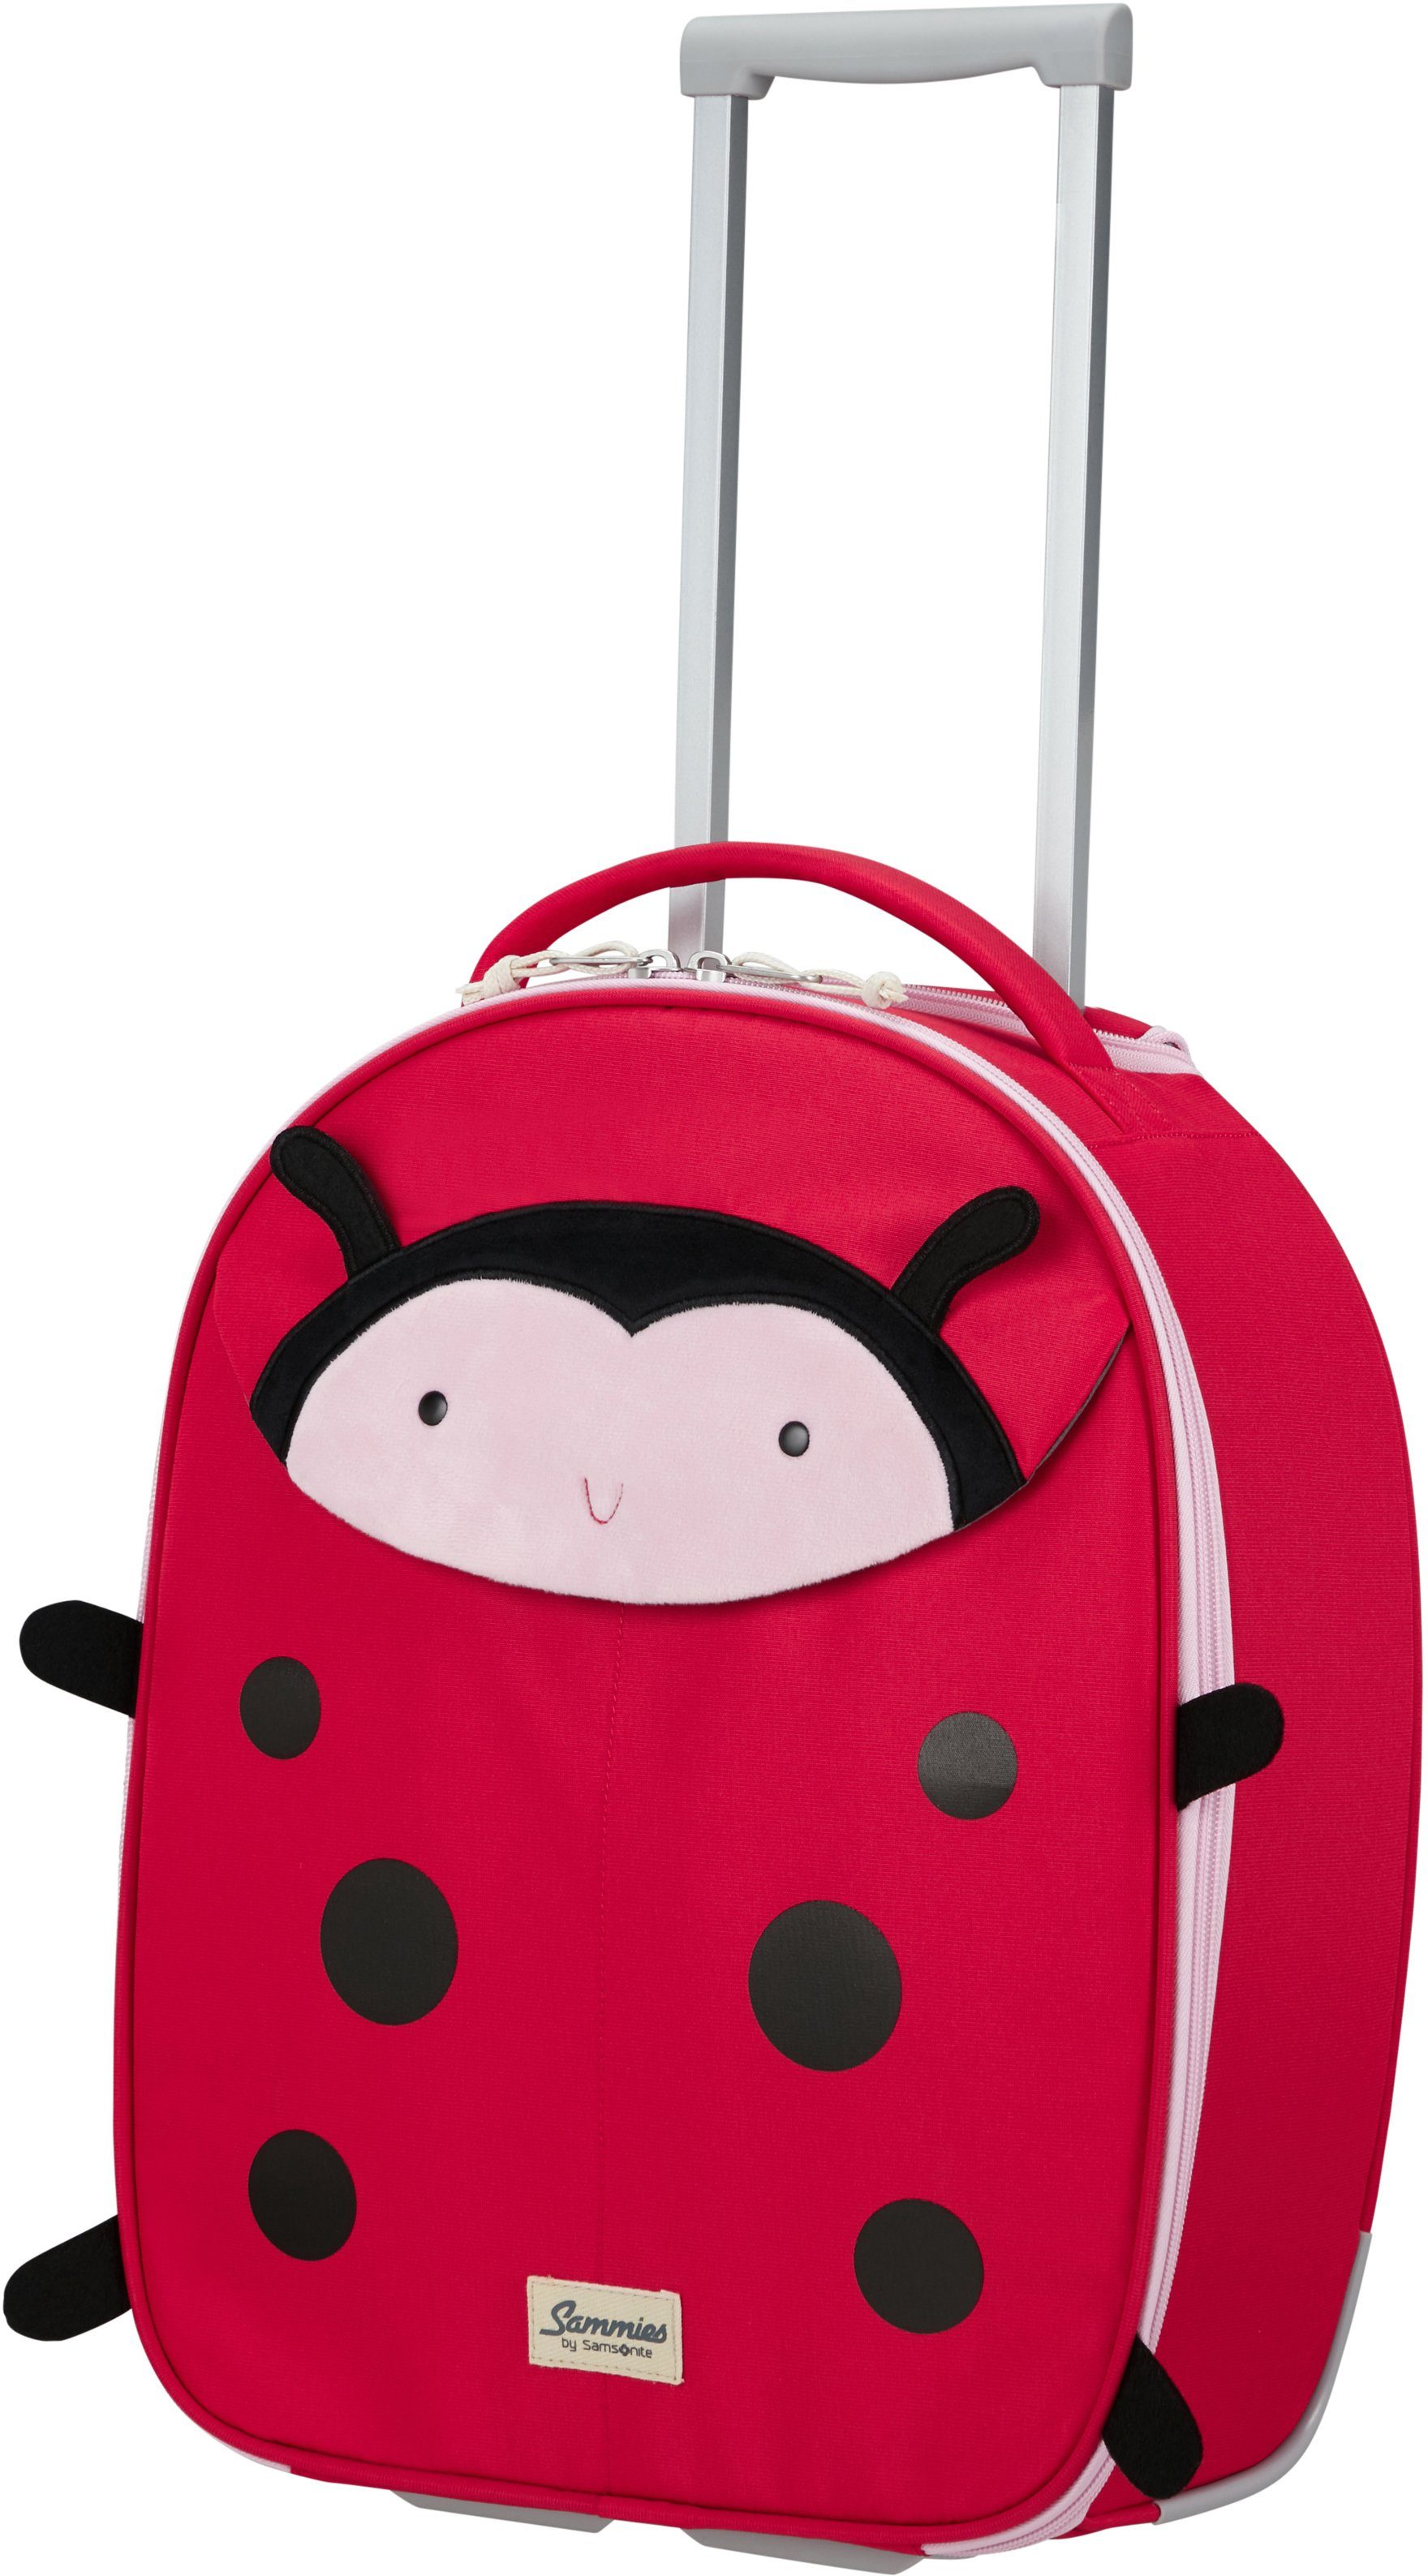 Sammies recyceltem ECO, Happy Kinderkoffer Rollen, Samsonite 2 aus Material Ladybug Lally,